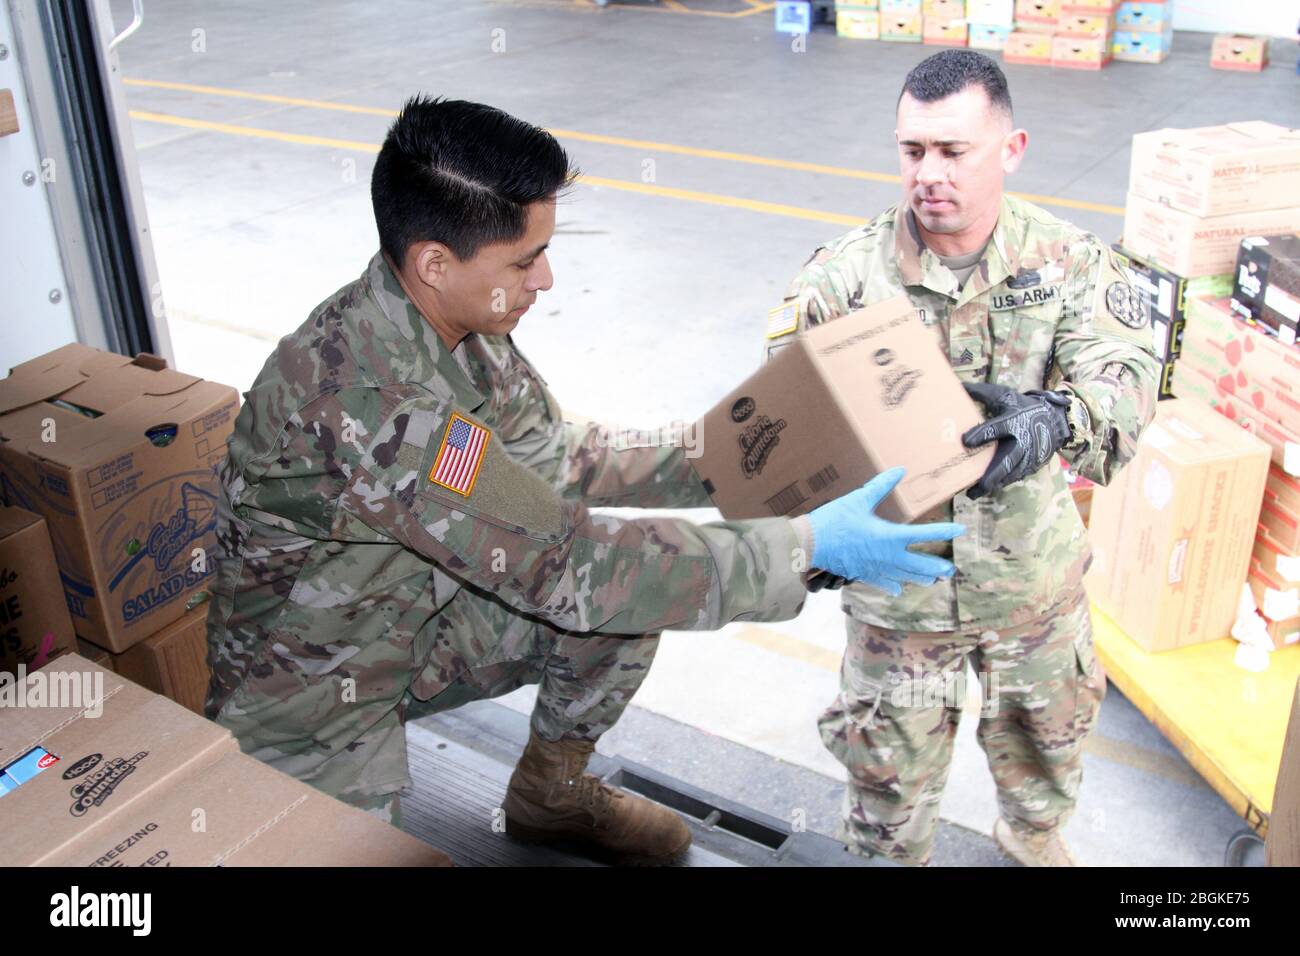 California Army National Guardsmen under the 115th Regional Support Group load a truck with food supplies March 31 at the Sacramento Food Bank & Family Services’ distribution outlet in Sacramento, California. After weeks of COVID-19 humanitarian support, the Guardsmen are adding to their responsibilities by now serving as truck drivers, delivering food from the facility out to the public. (Army National Guard photo by Staff Sgt. Eddie Siguenza) Stock Photo